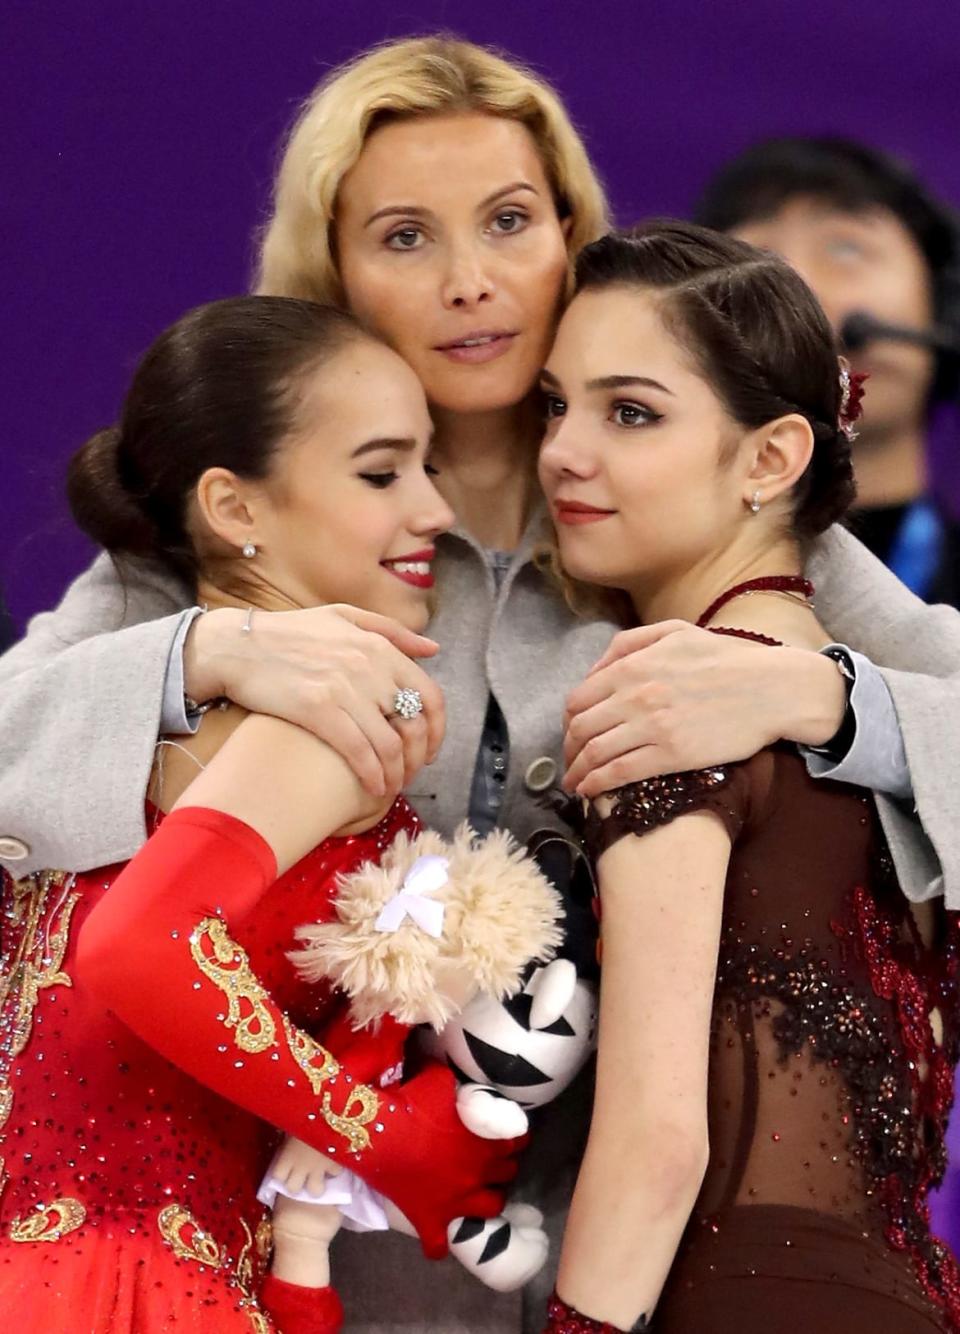 <div class="inline-image__caption"><p>Eteri Tutberidze celebrated winning gold and silver at the 2018 Winter Games with her young stars Alina Zagitova and Evgenia Medvedeva .</p></div> <div class="inline-image__credit">Richard Heathcote/Getty Images</div>